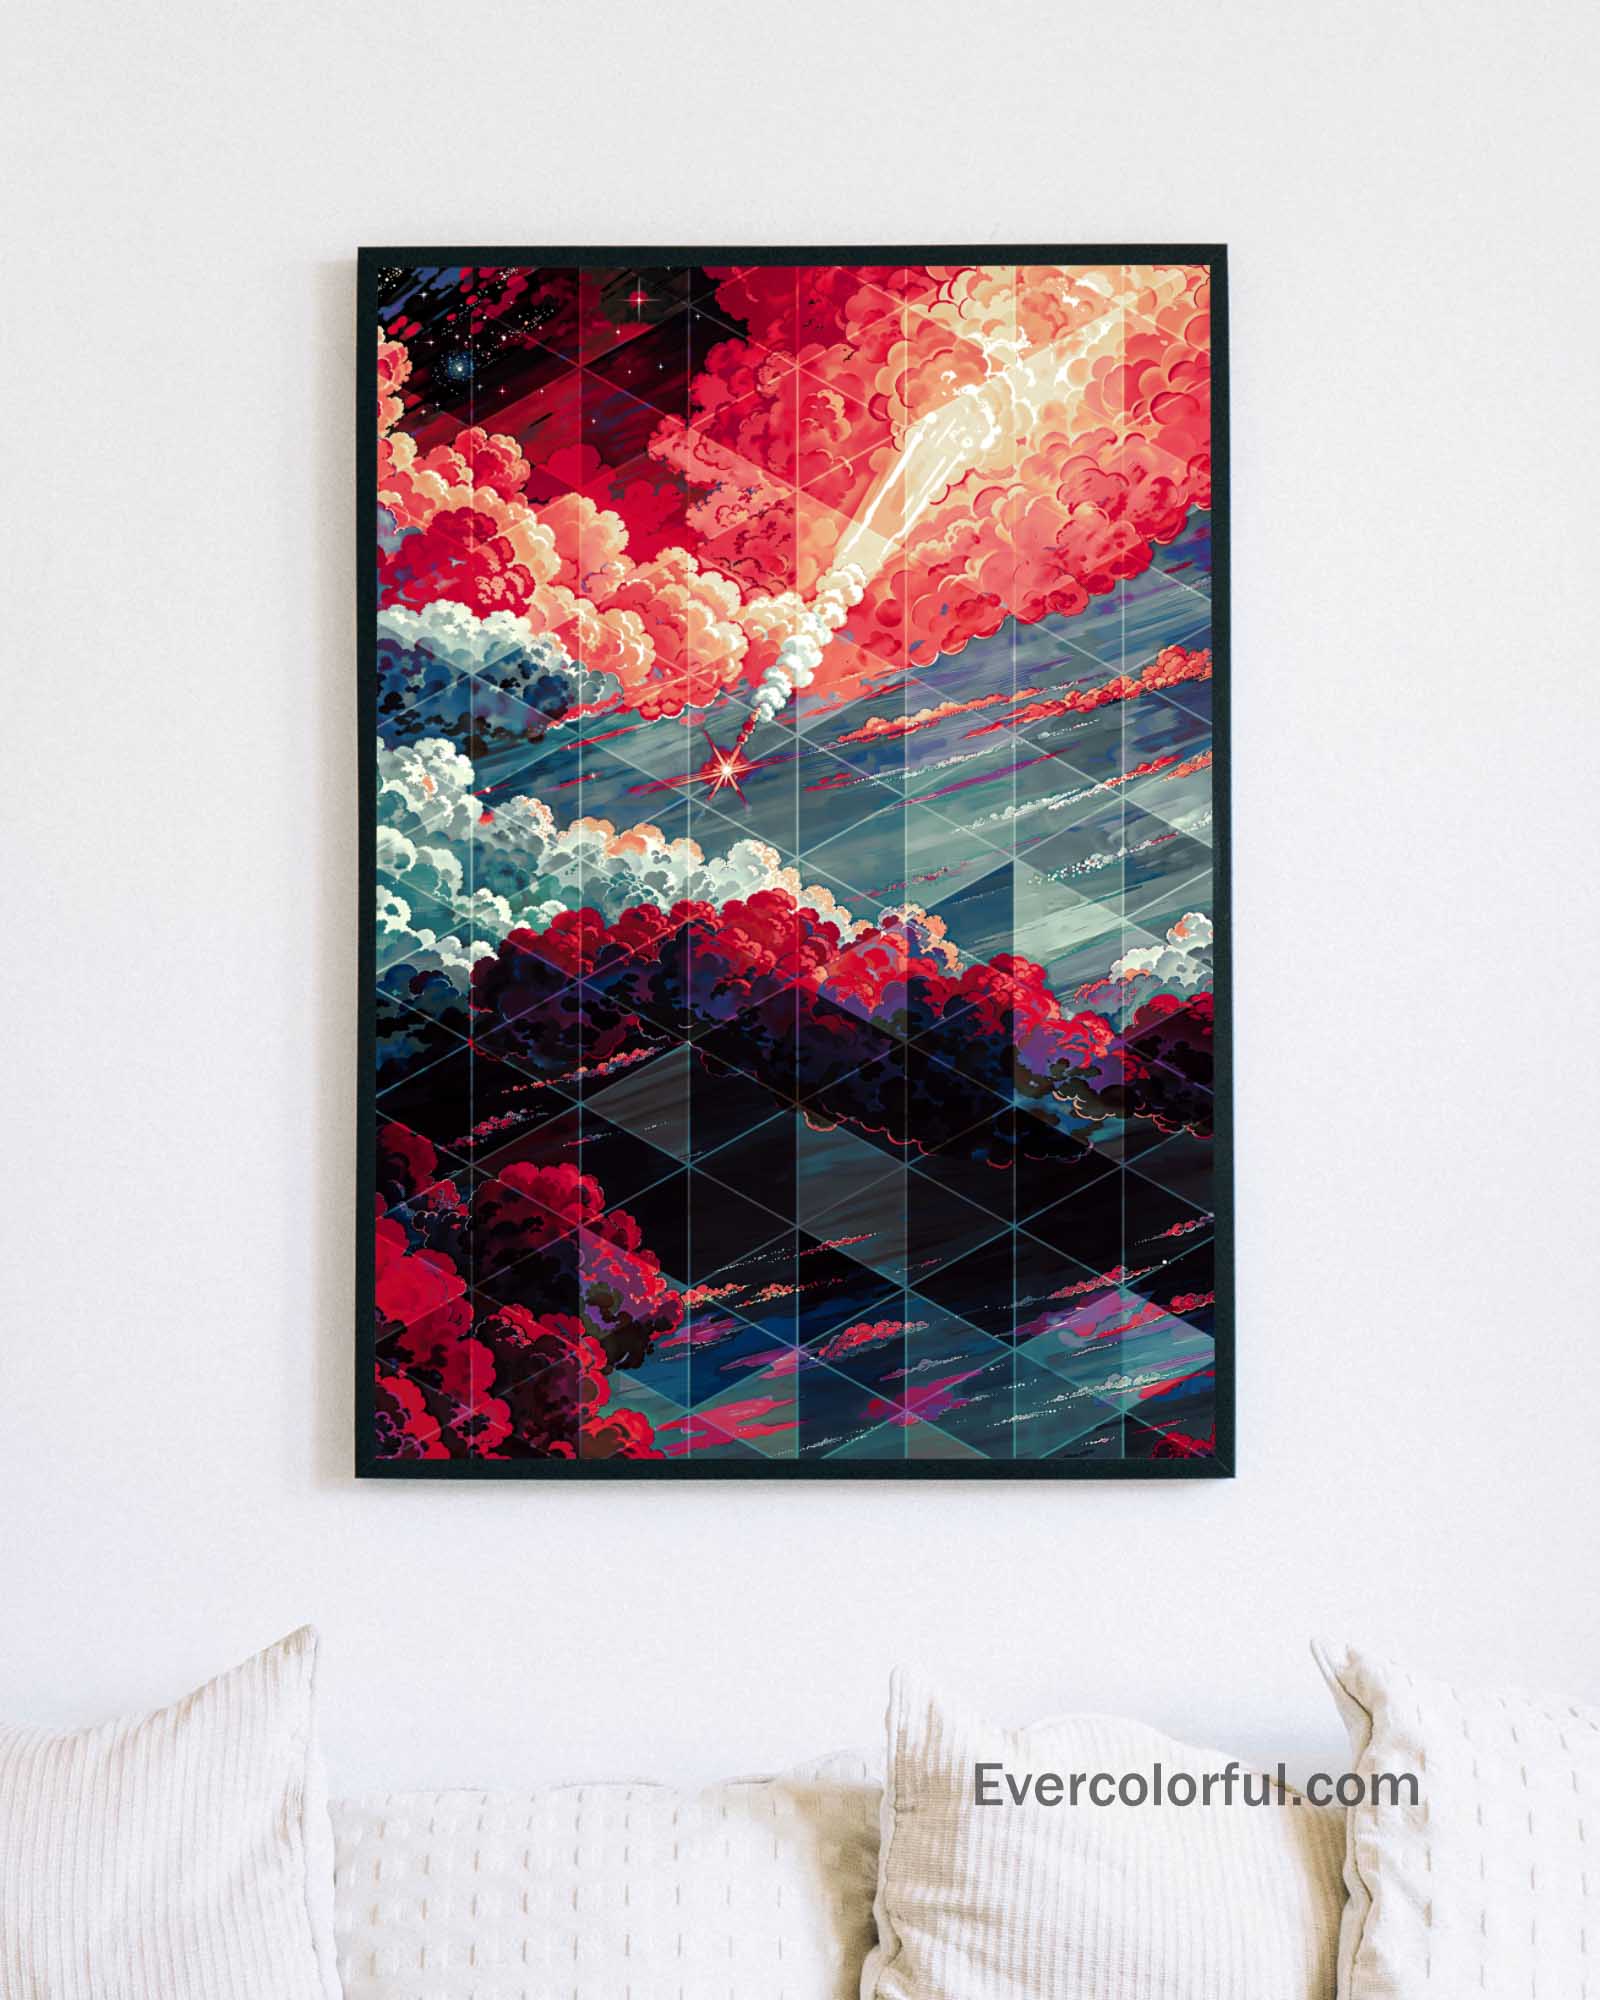 Falling cataclysm - Poster - Ever colorful